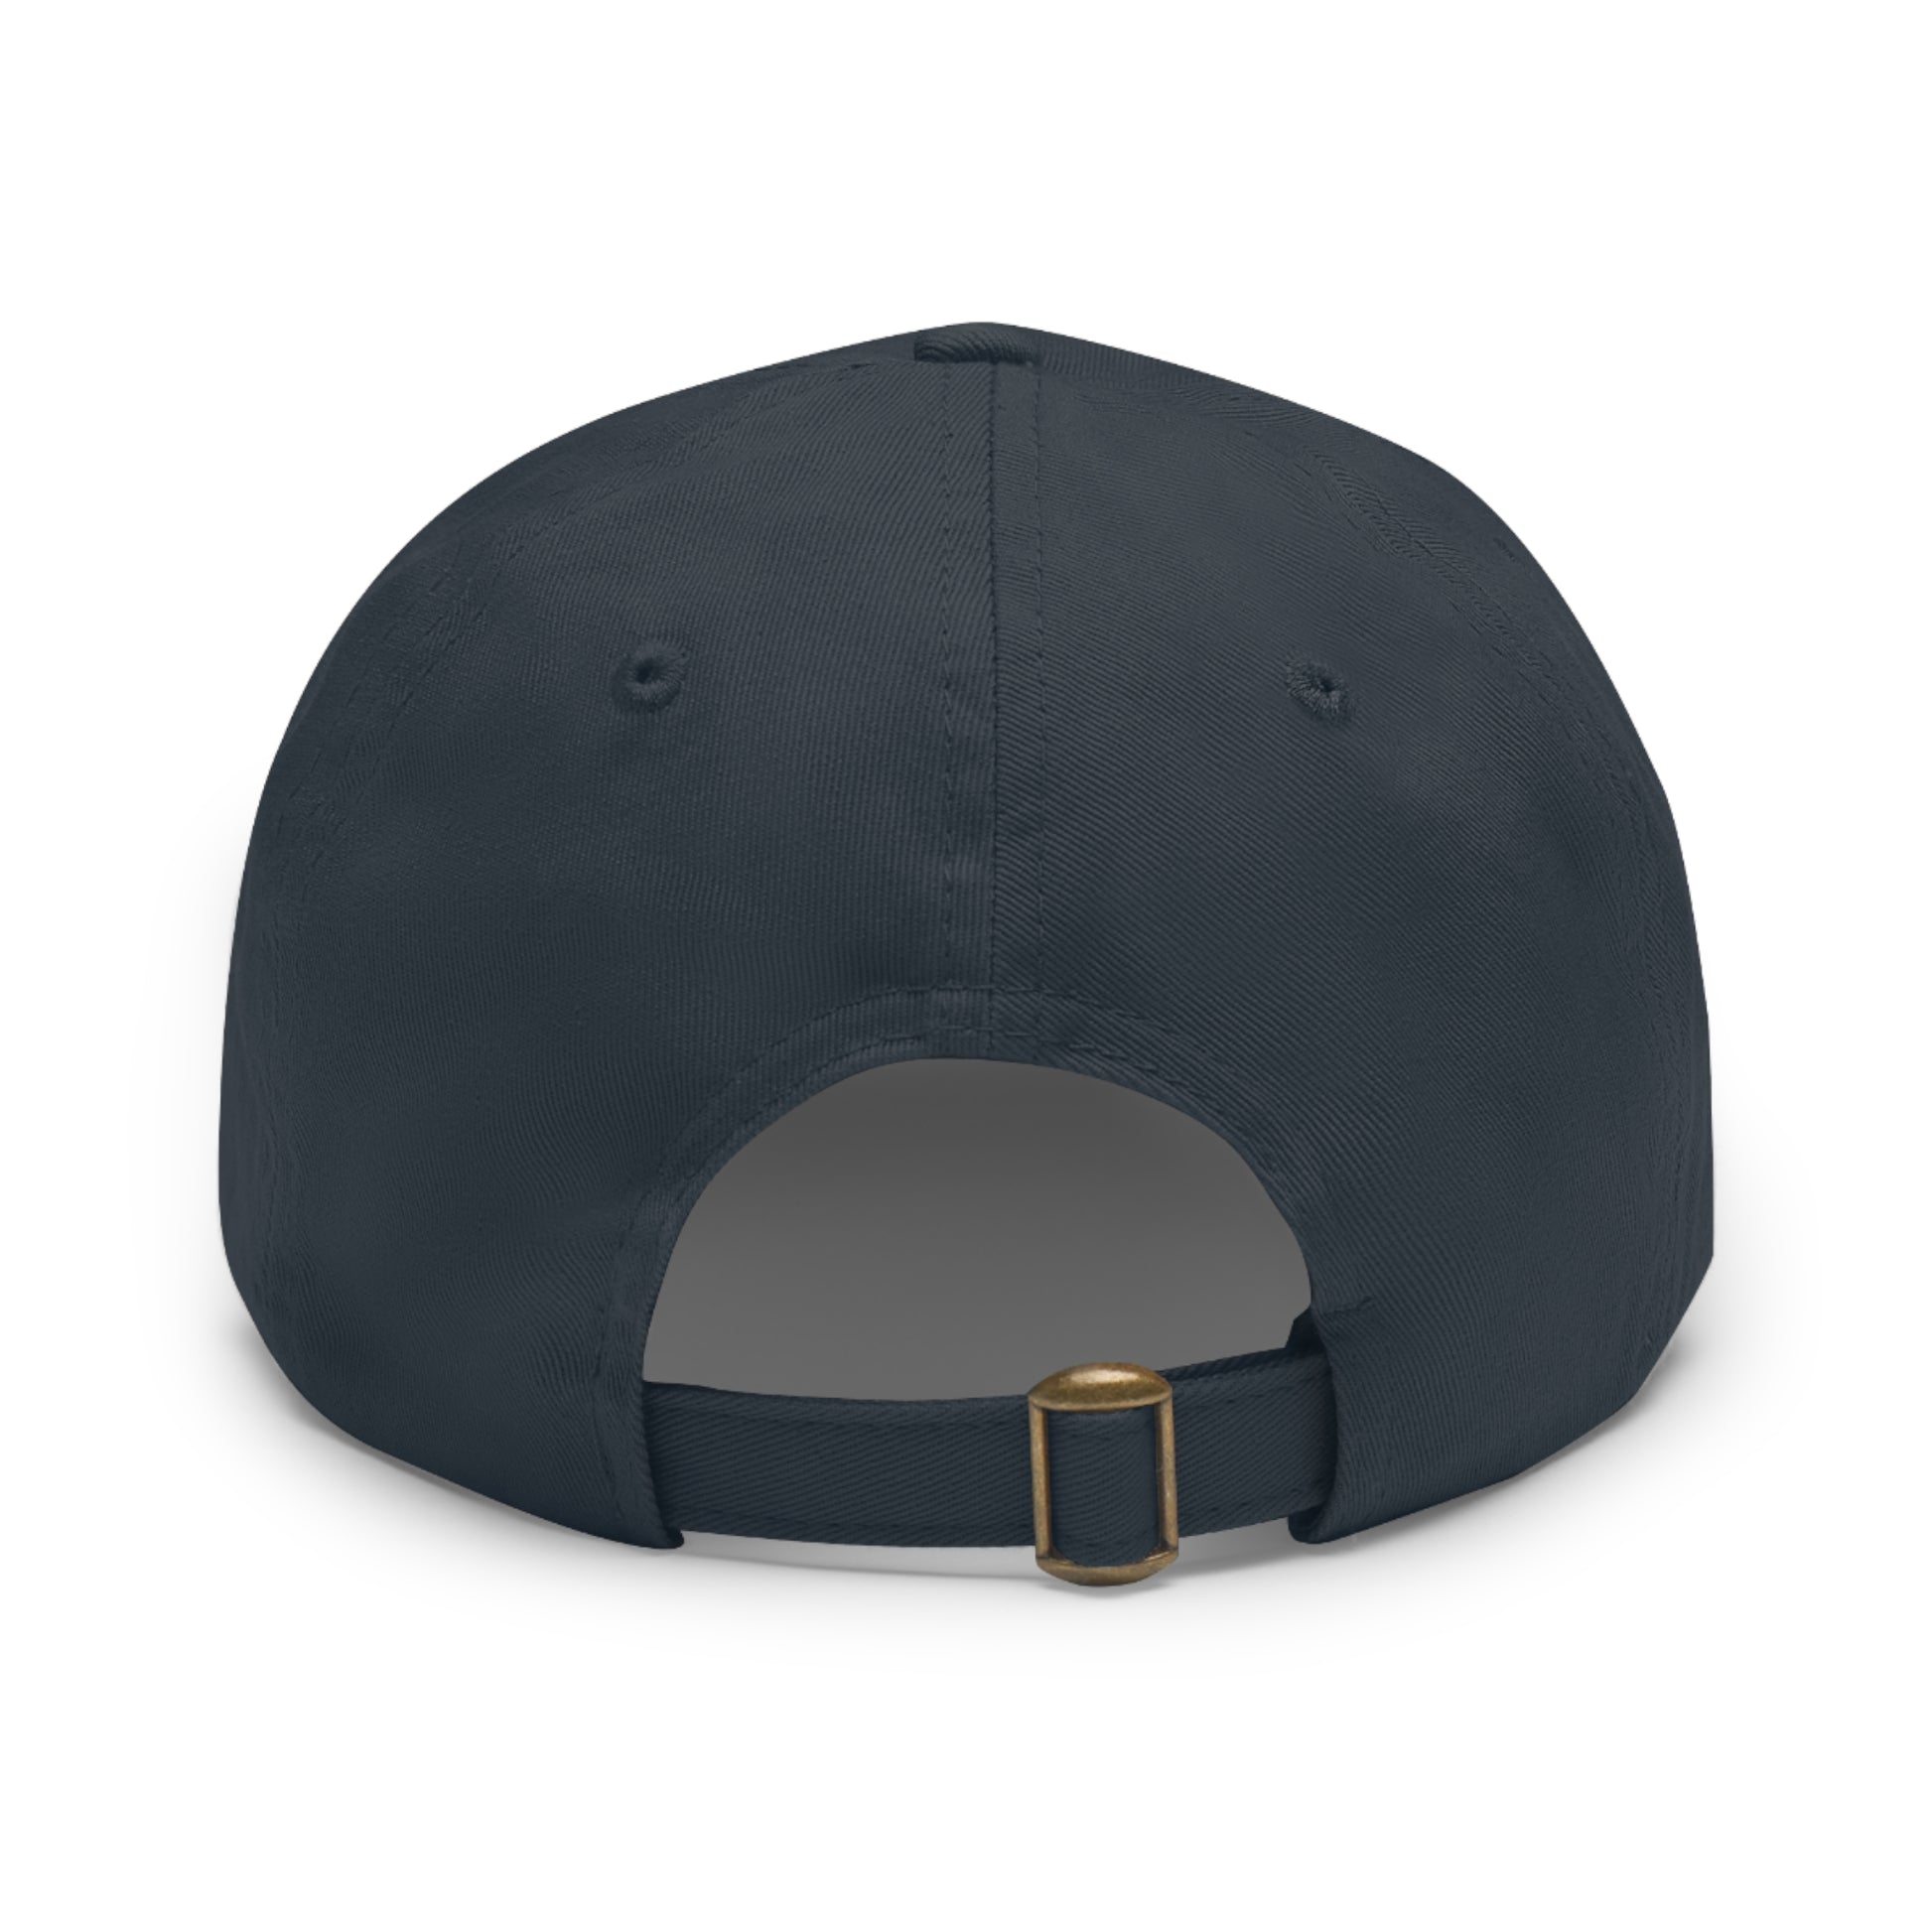 LUXMAN Hat with Leather Patch Printify